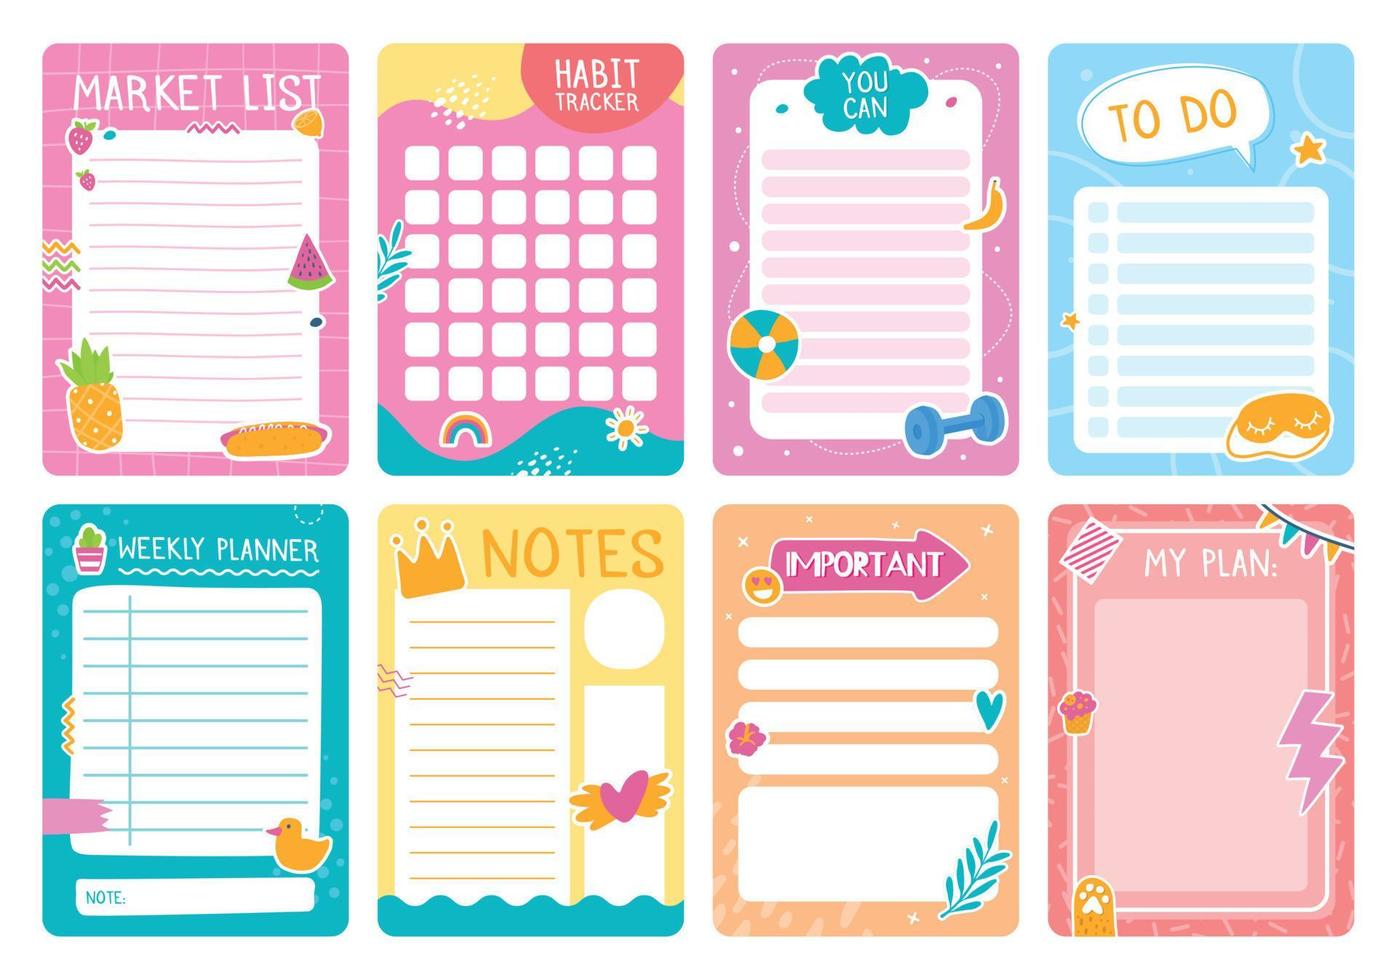 Cute planner pages with stickers, notebook or diary template. Weekly planner, to do list, habit tracker kids journal page design vector set